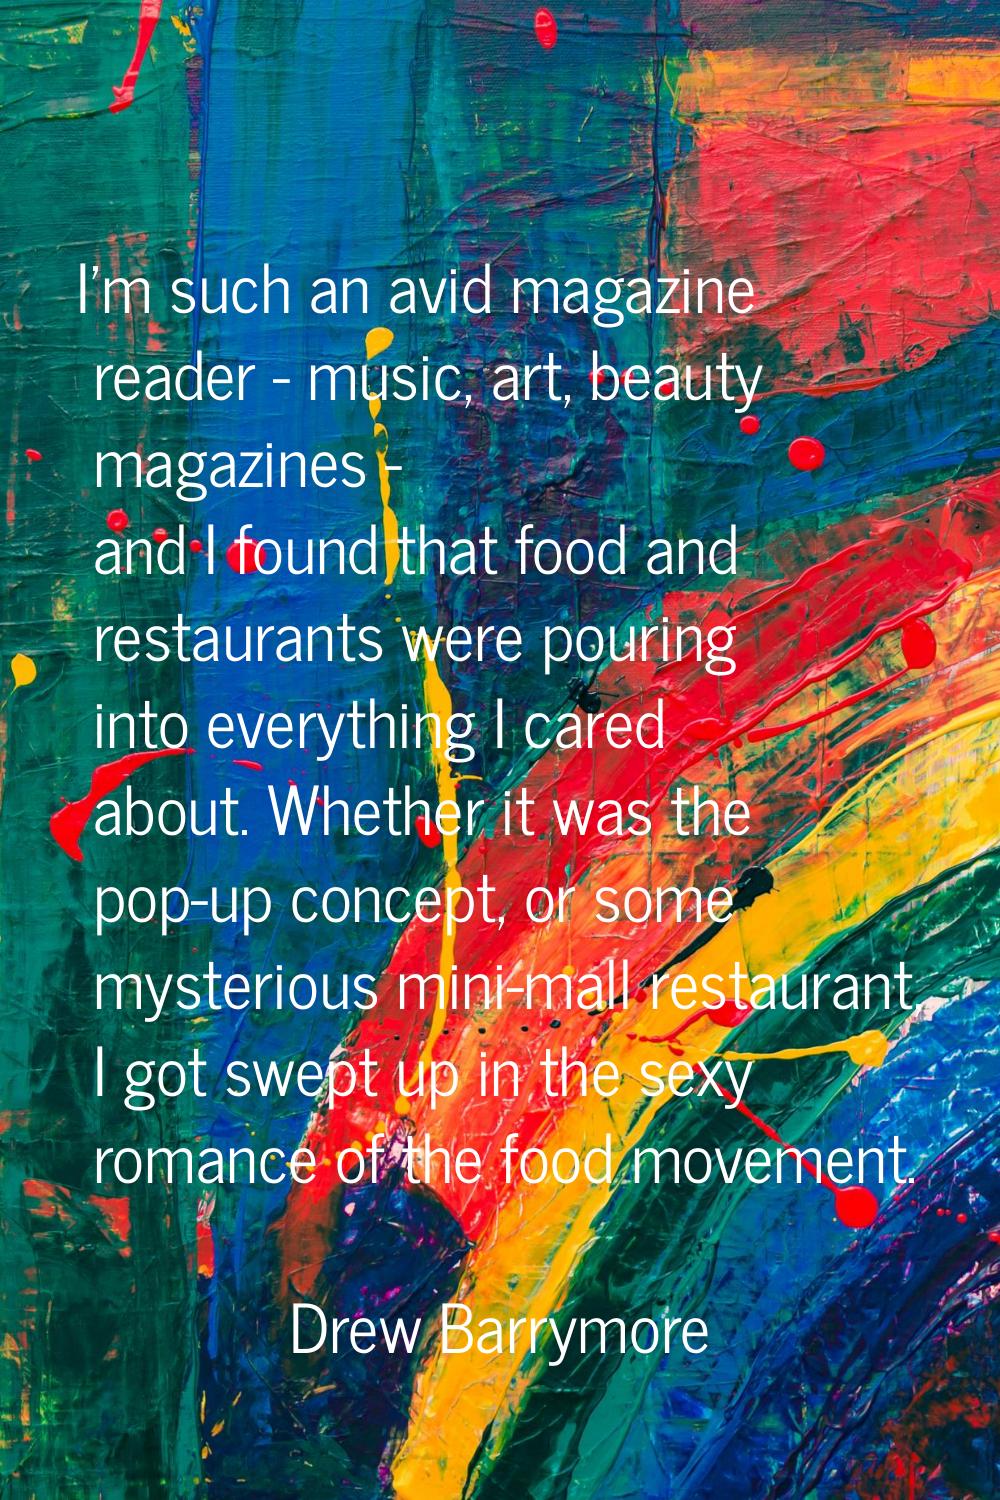 I'm such an avid magazine reader - music, art, beauty magazines - and I found that food and restaur